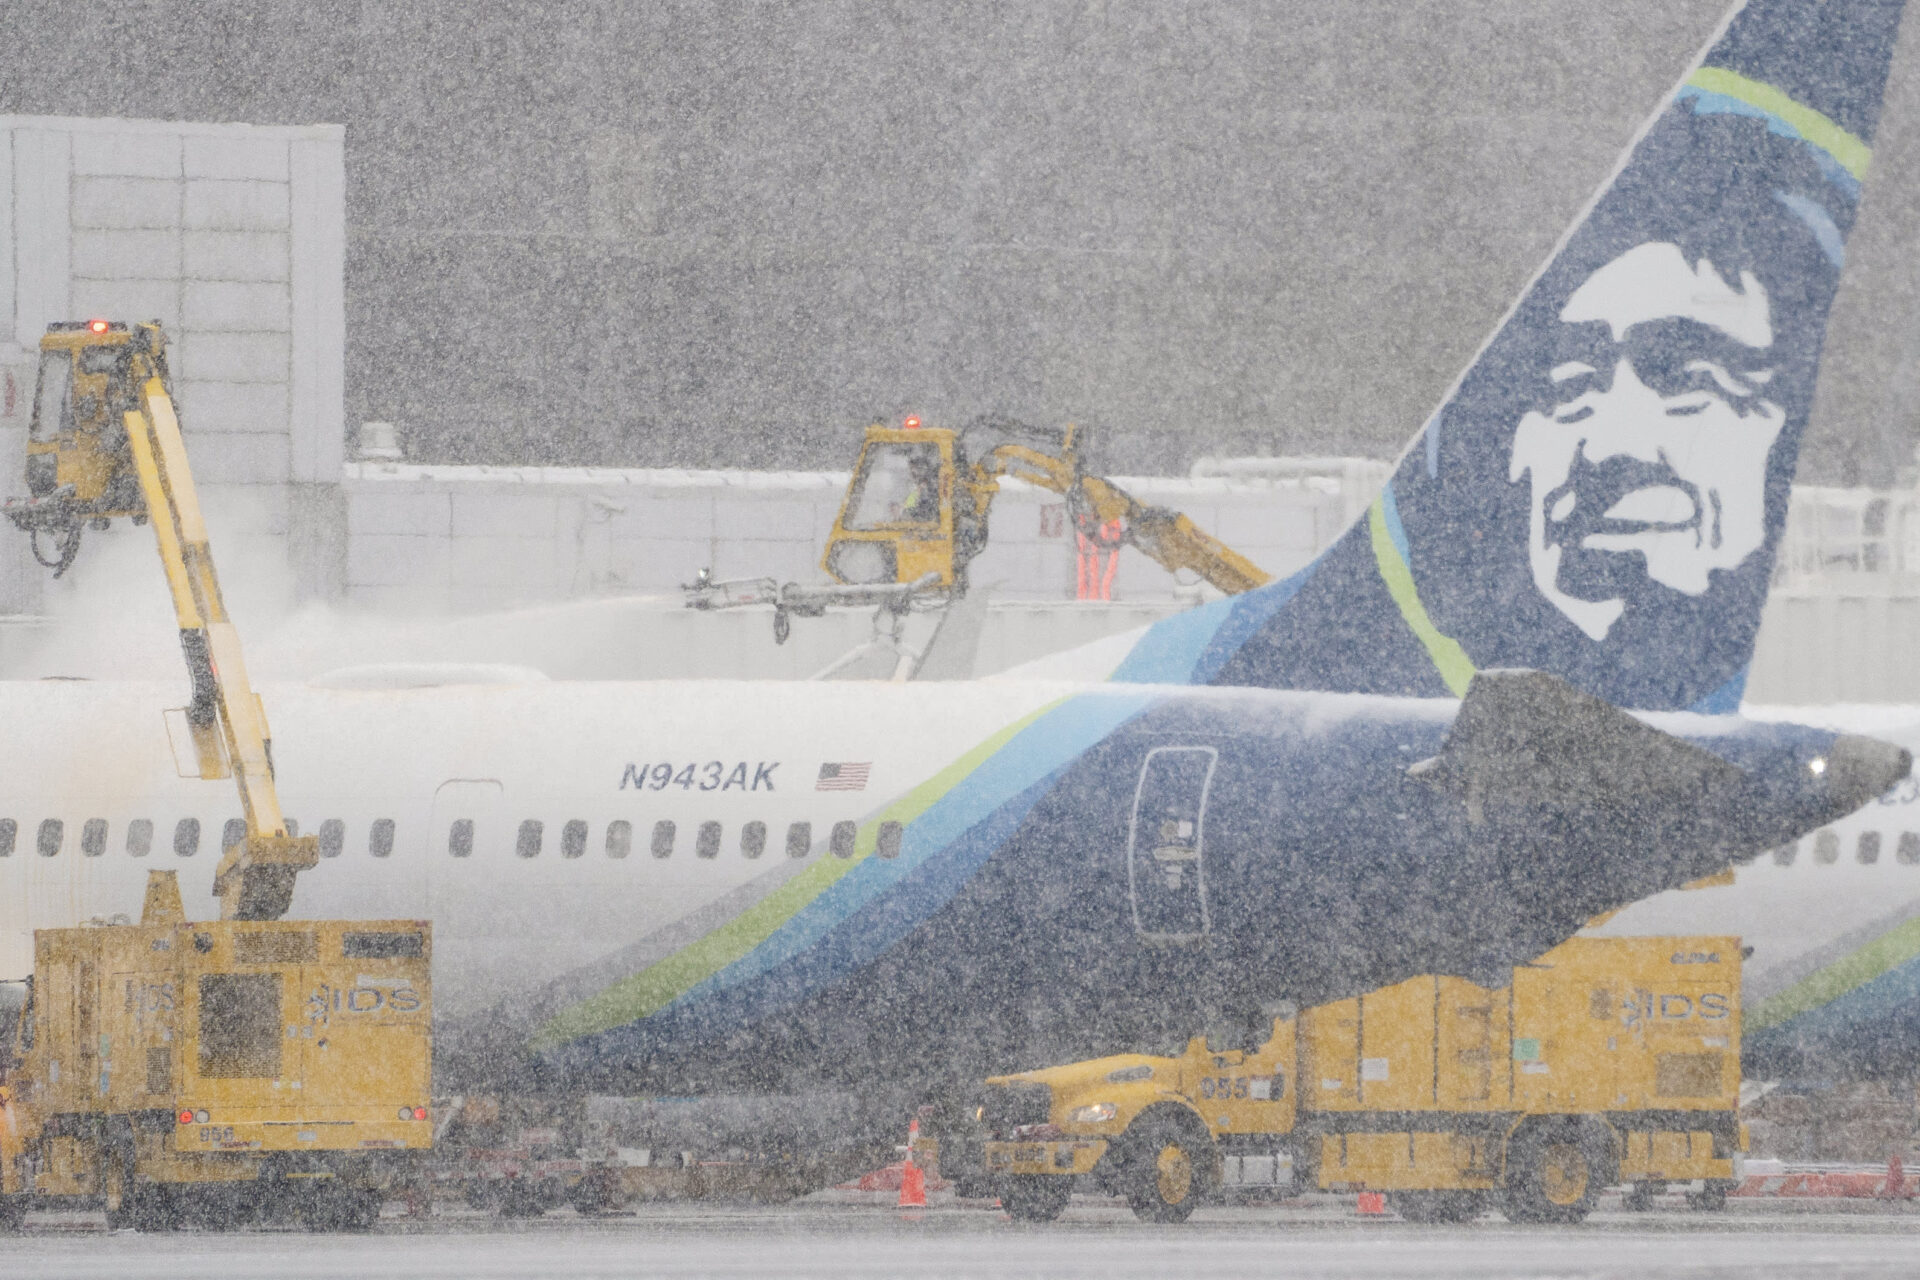 The Severe Weather Has Caused Hundreds Of Flight Cancellations